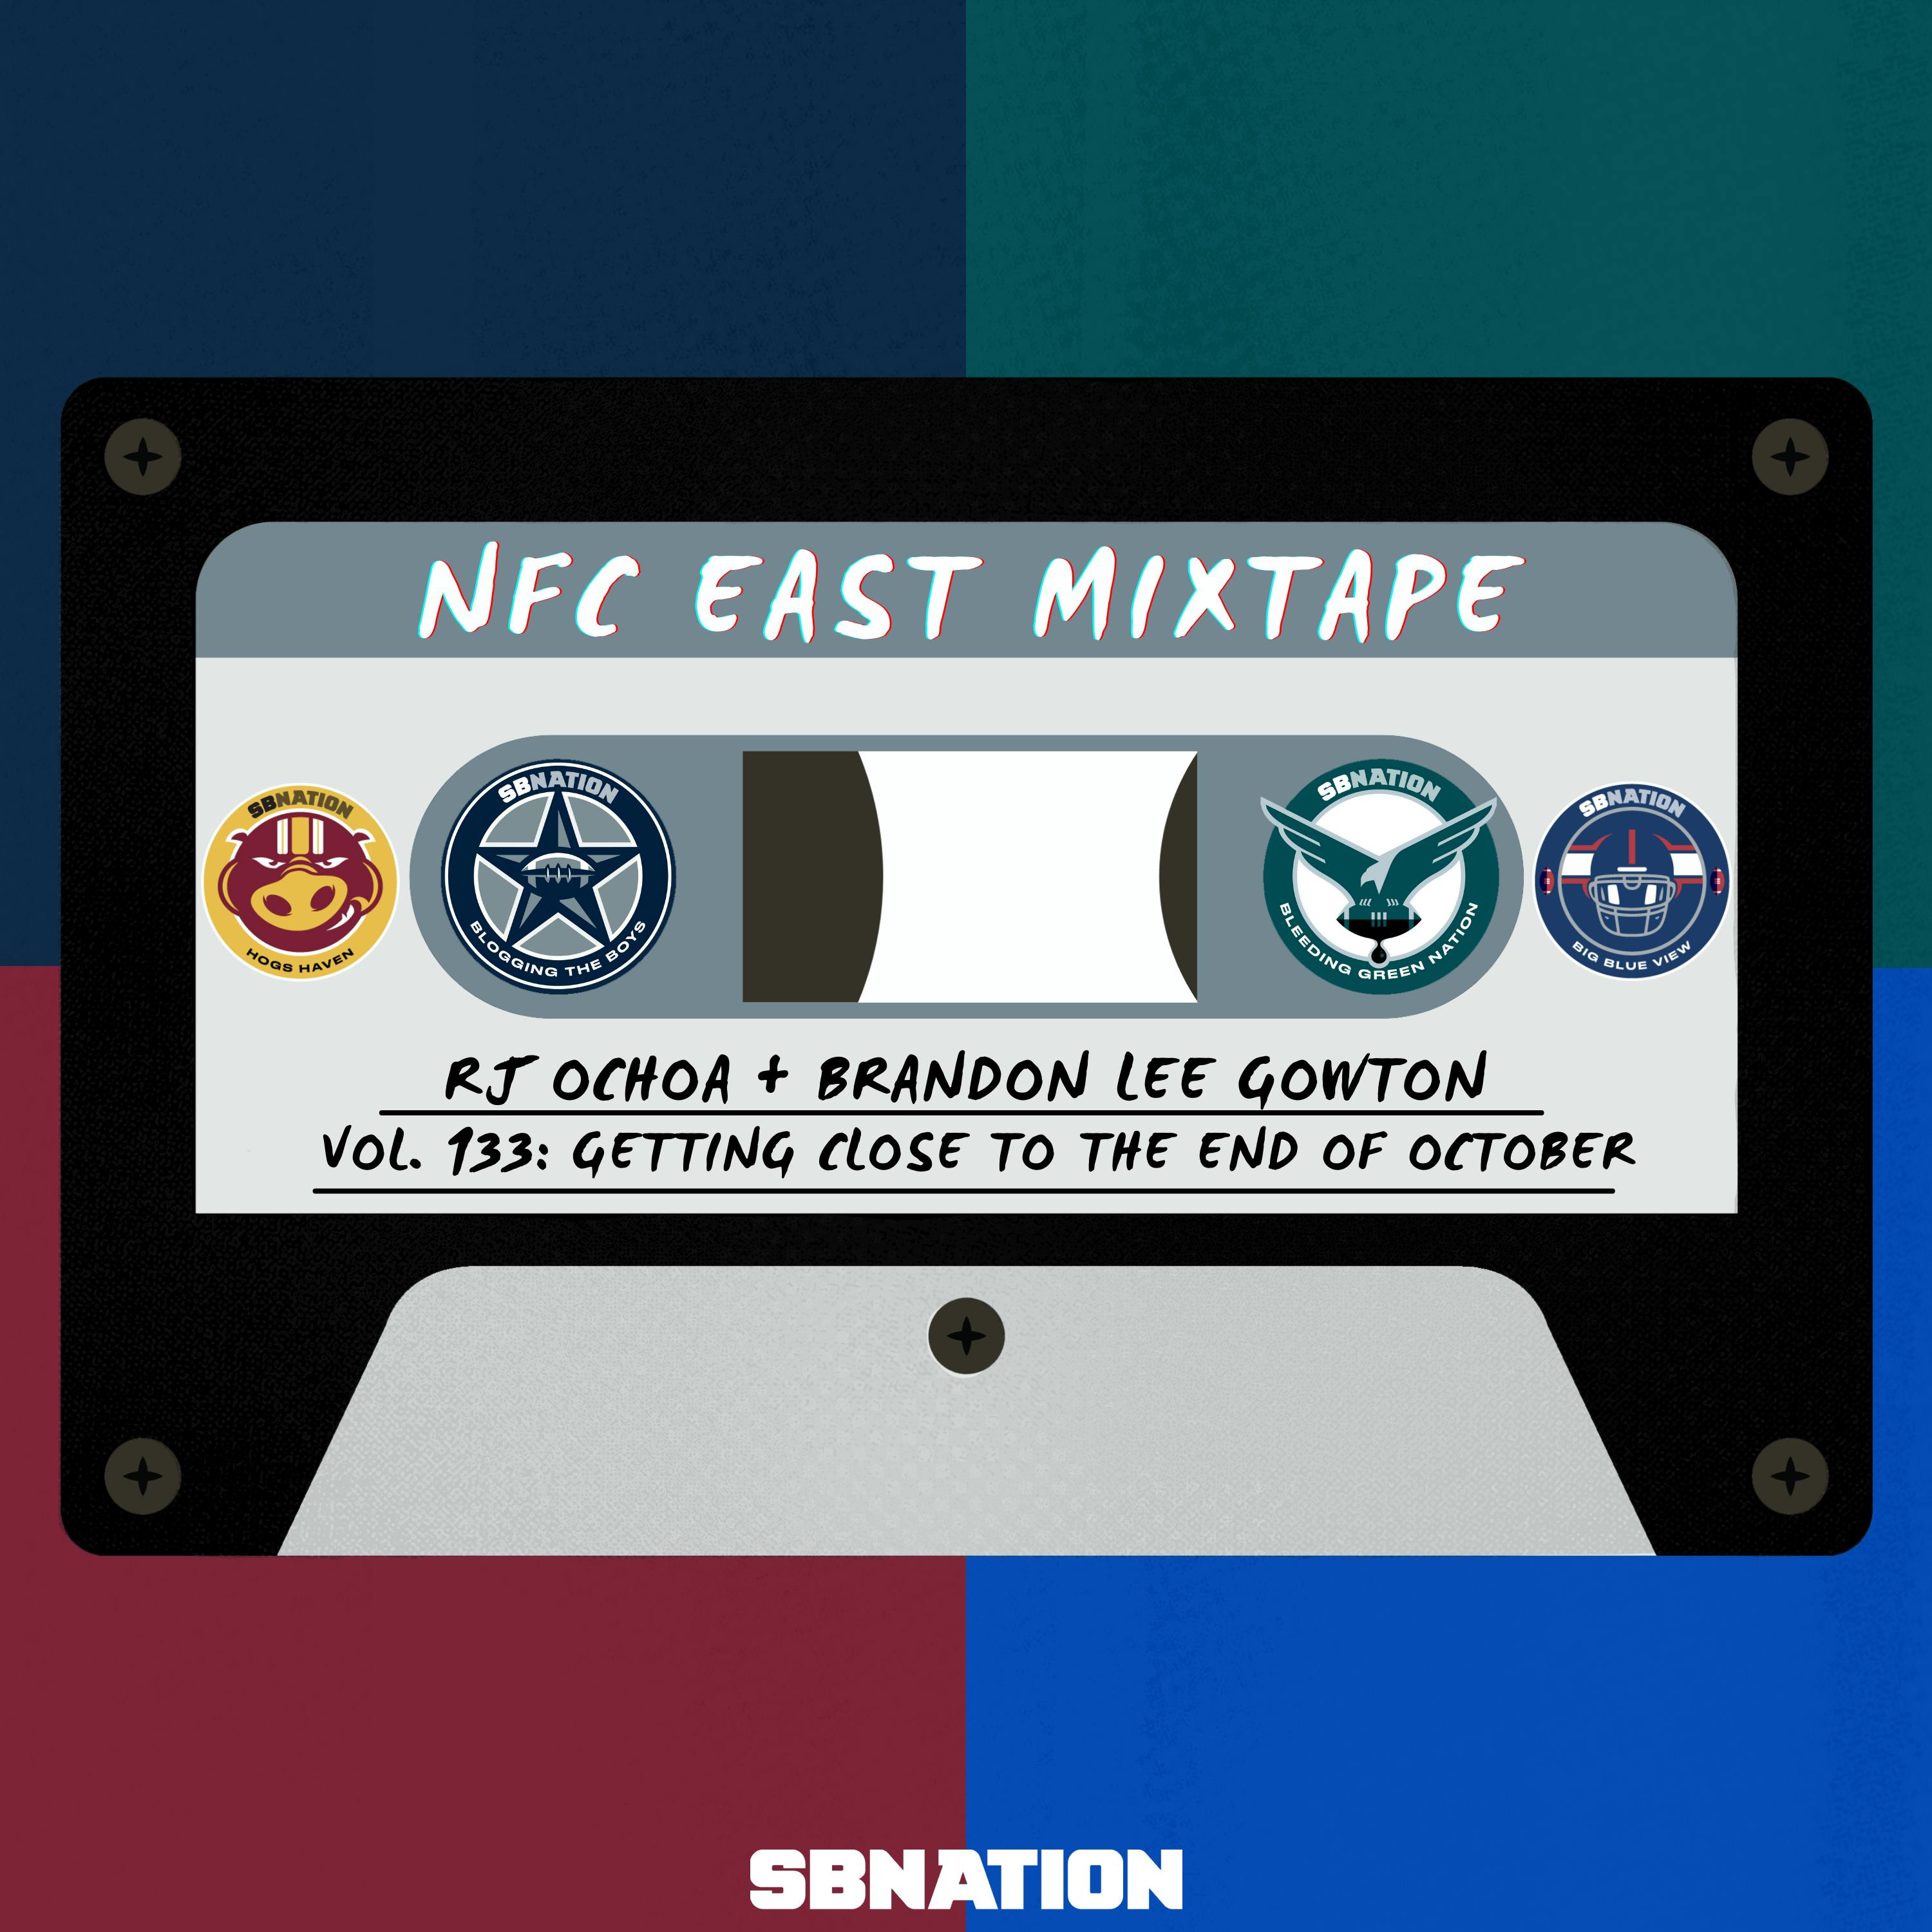 NFC East Mixtape Vol.133: Getting close to the end of October